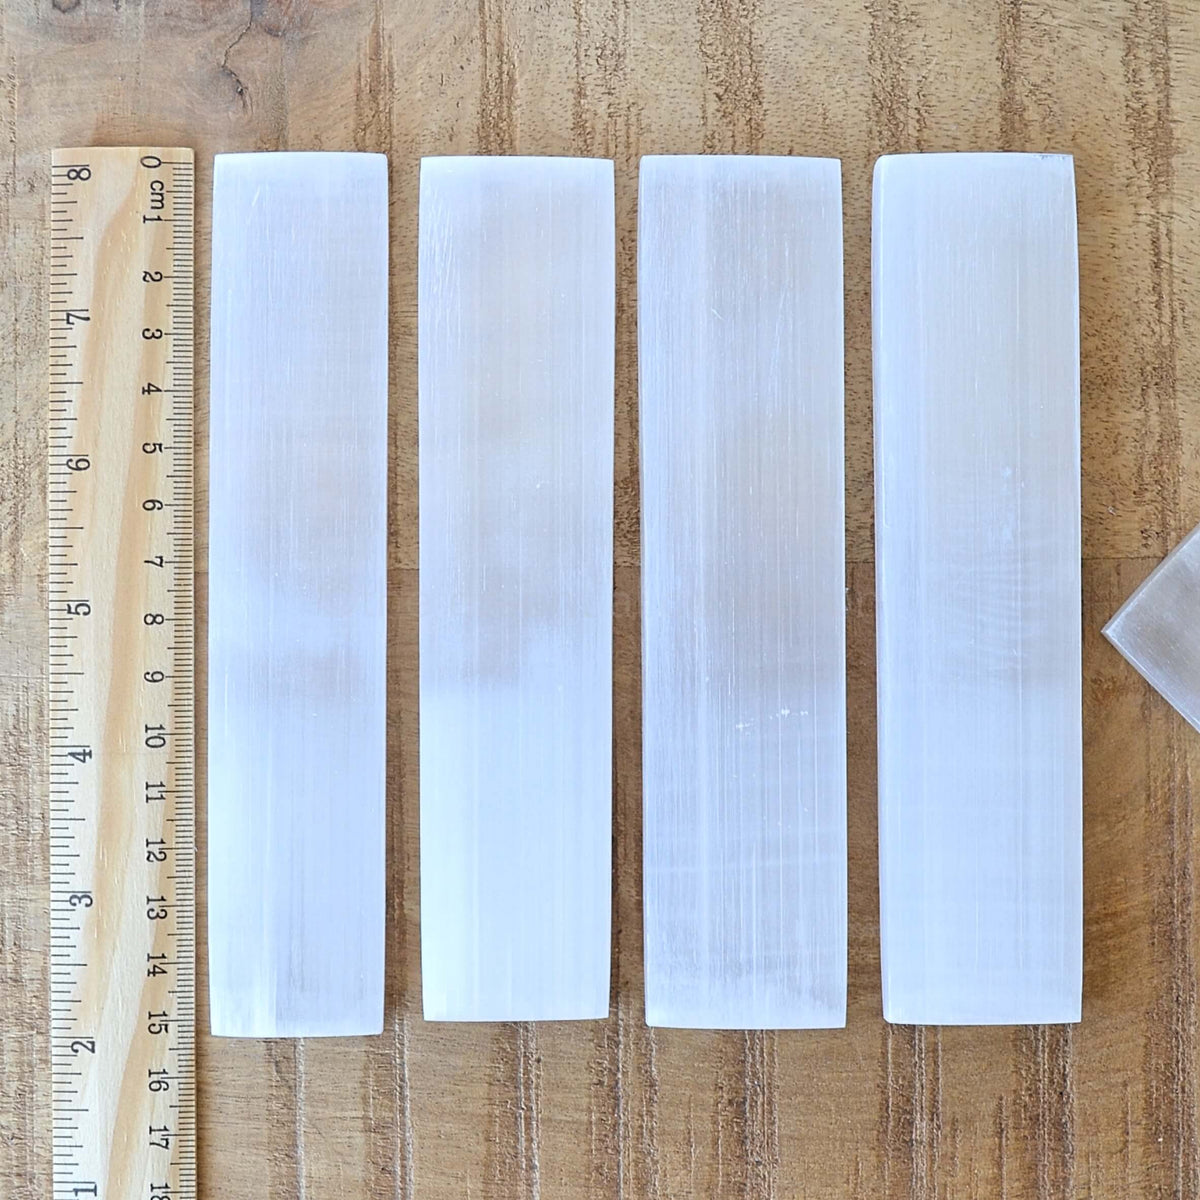 rectangle shaped selenite charging plates 15cm long with ruler showing length